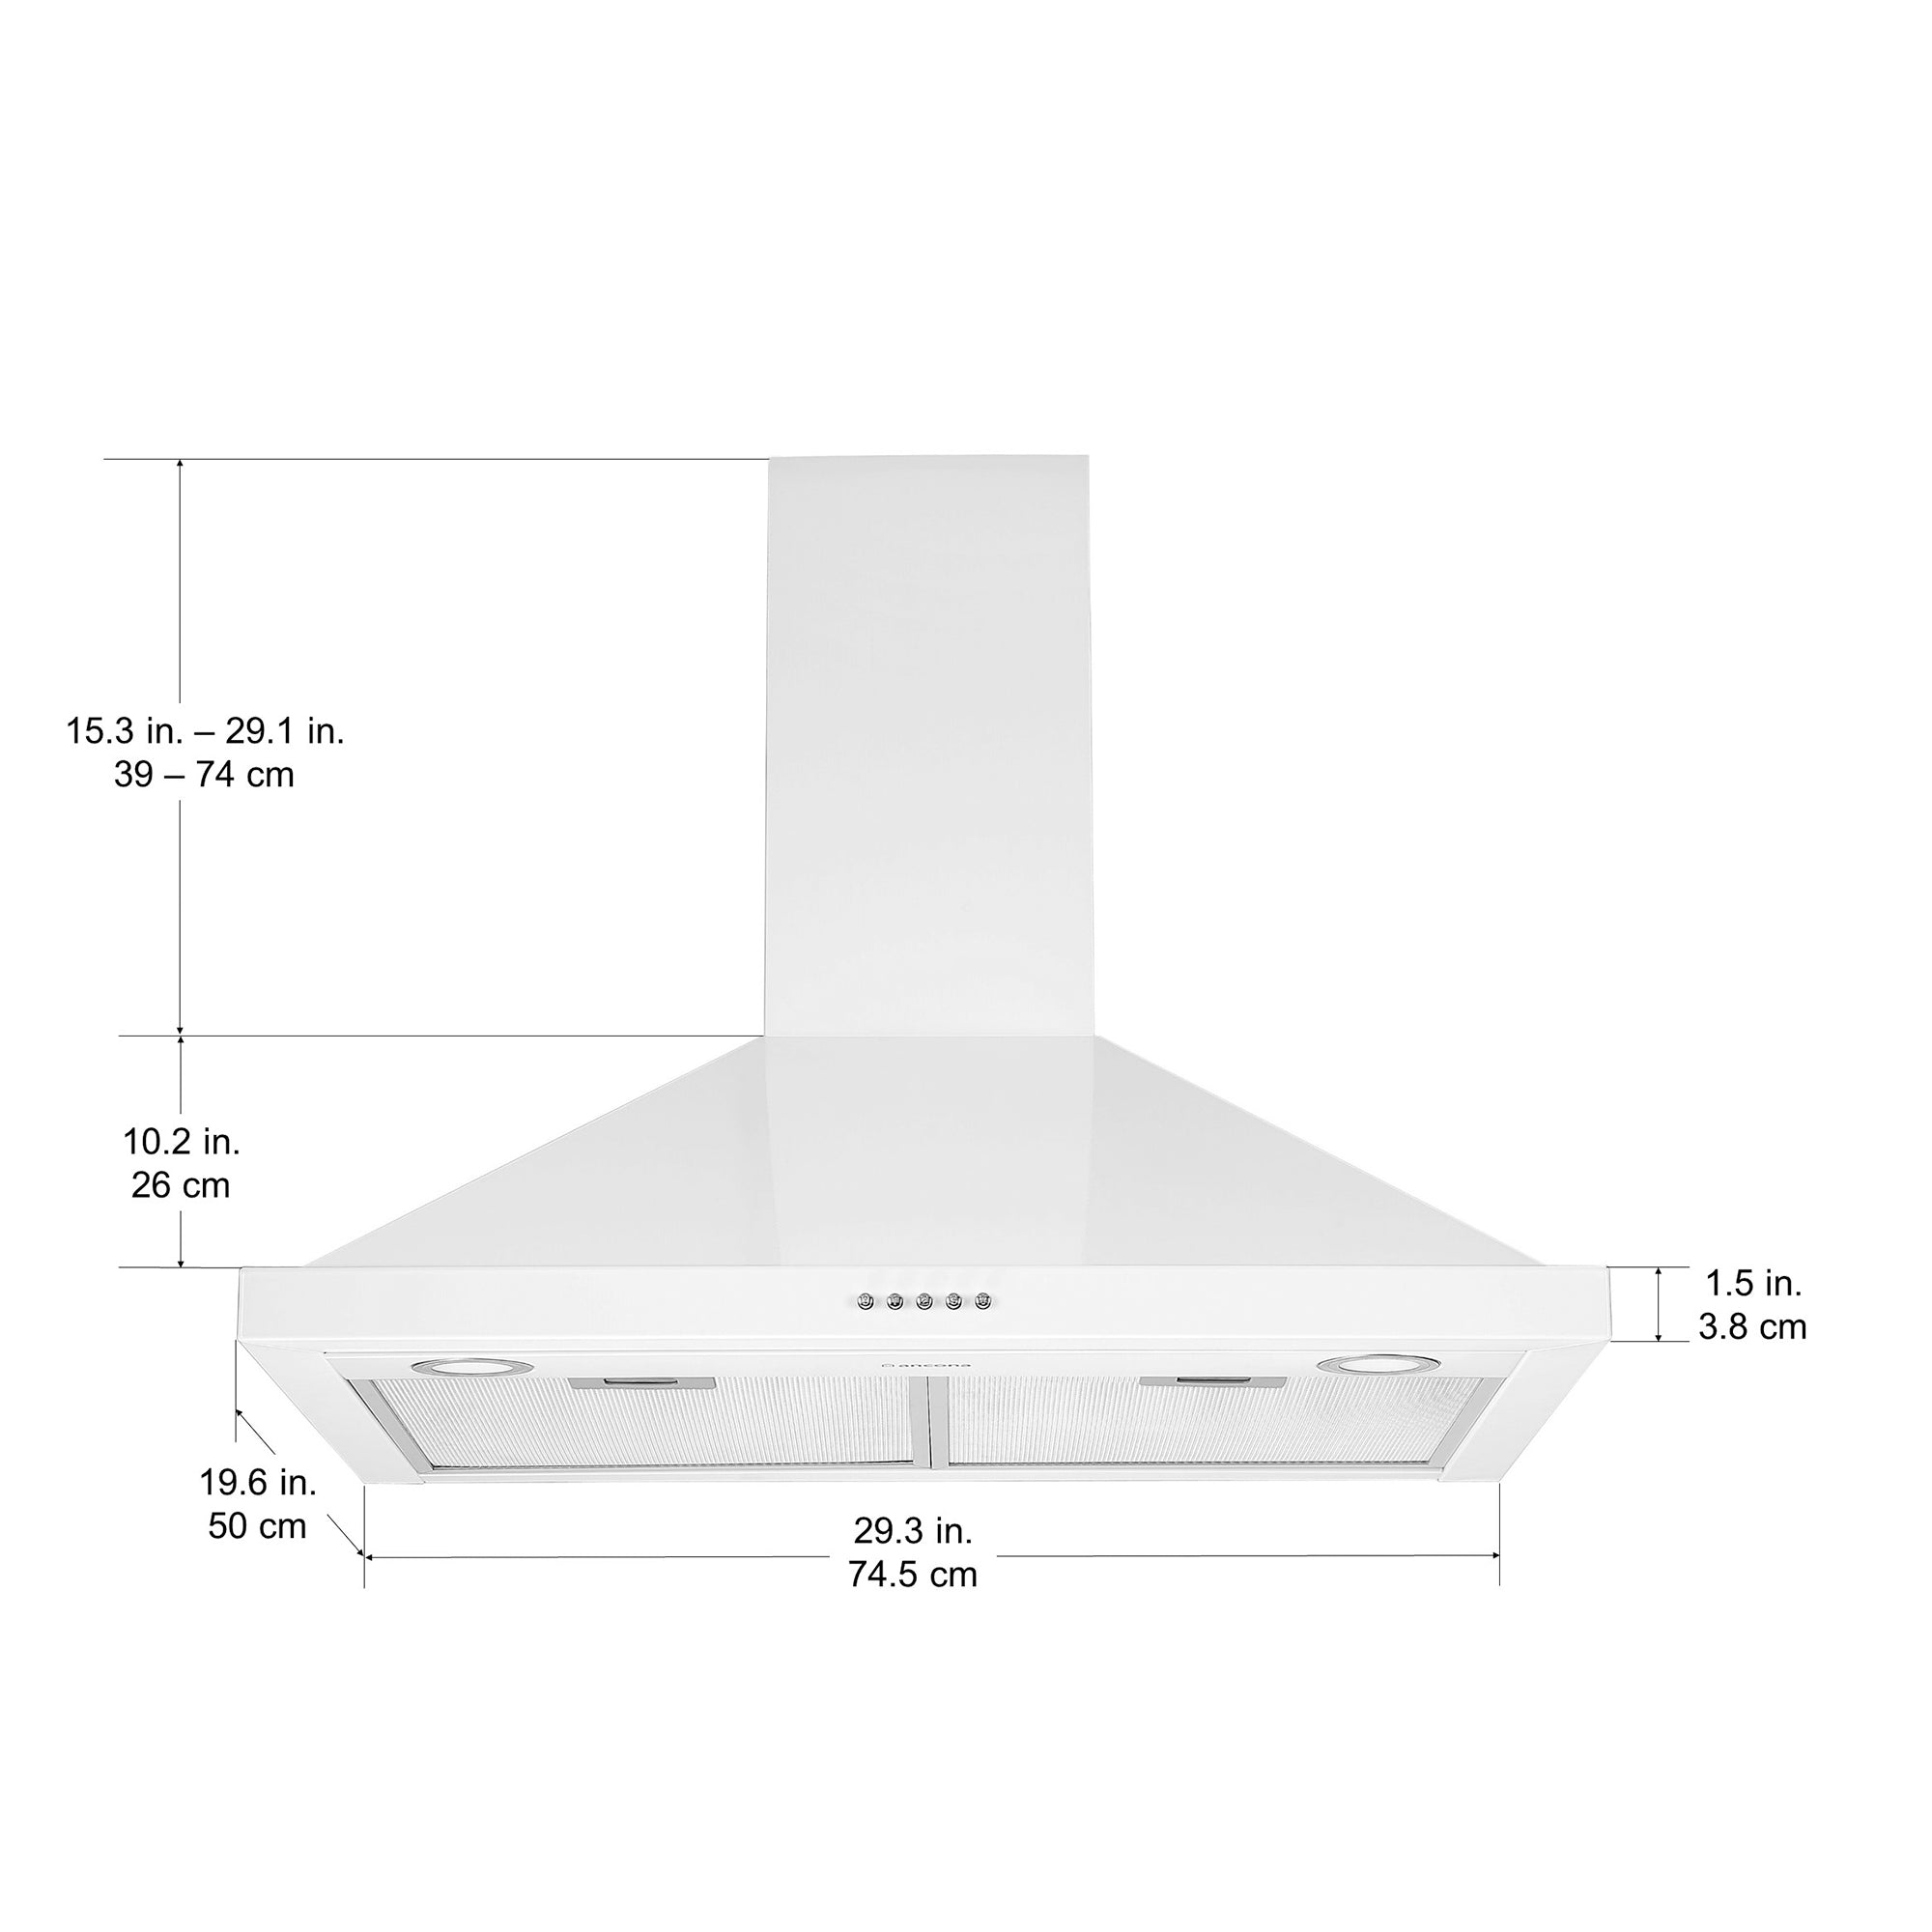 30 in. Convertible Wall-Mounted Pyramid Range Hood in White